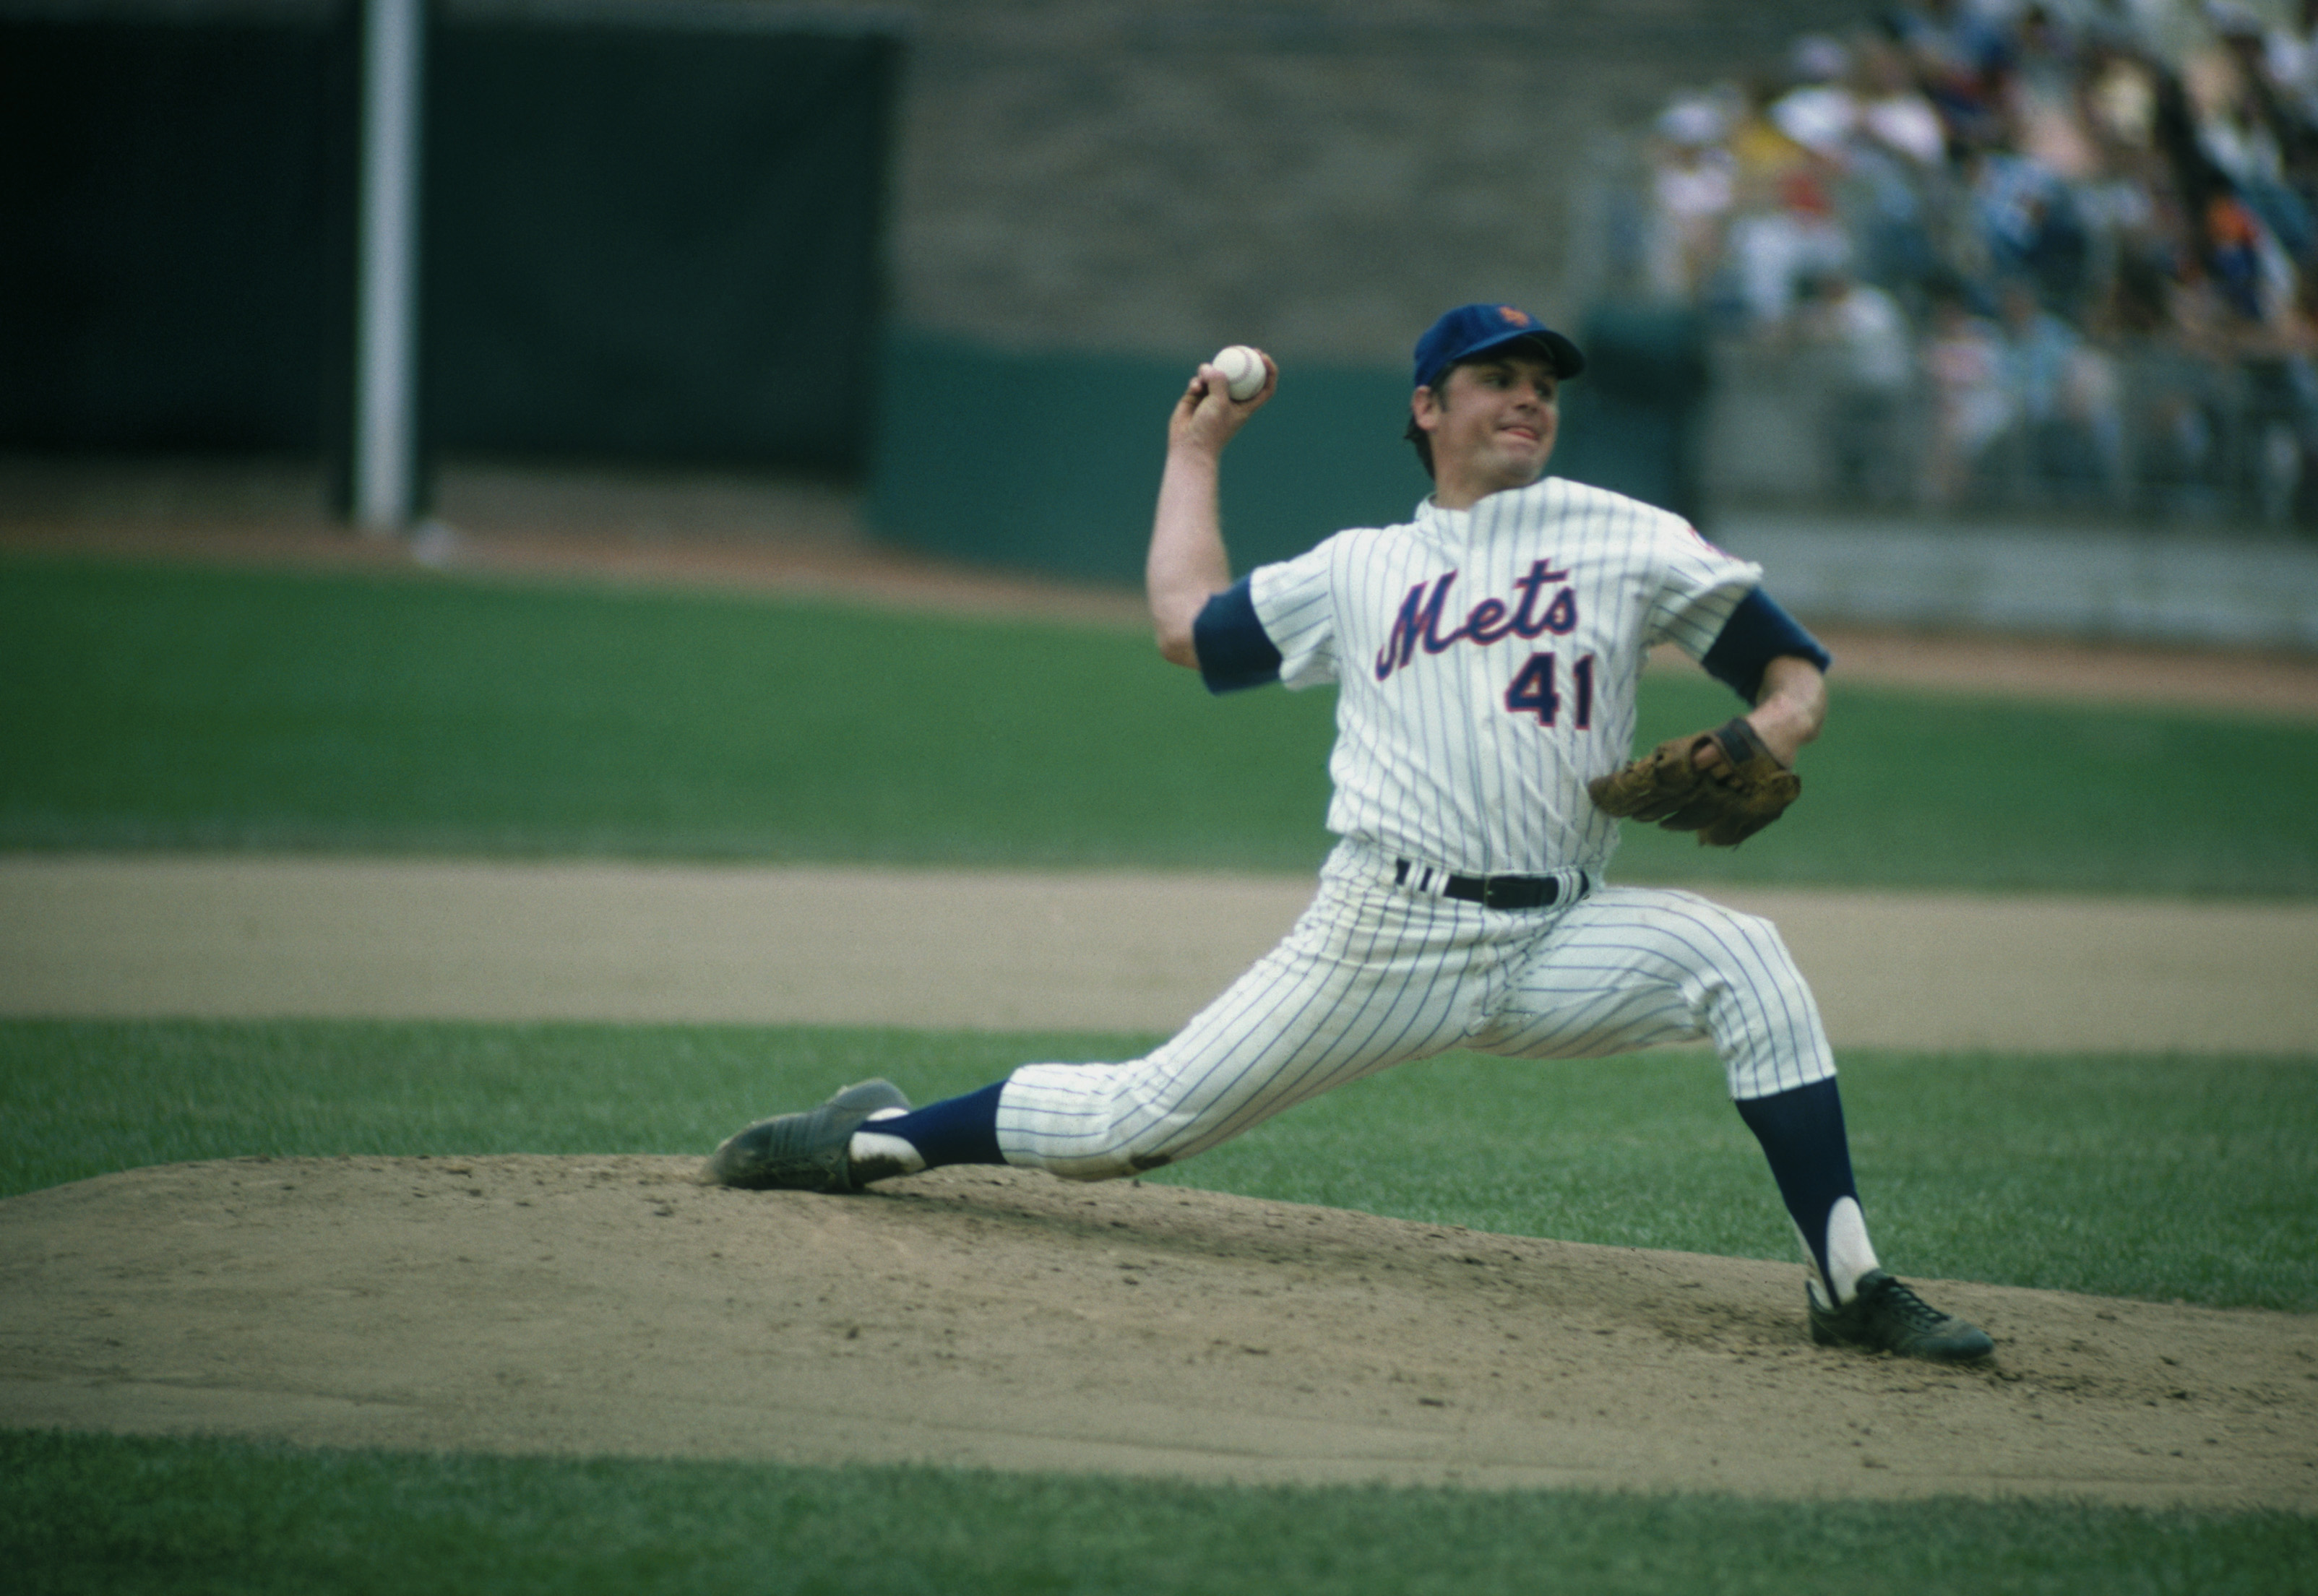 Mets to honor Tom Seaver with '41' patch on jersey - Newsday